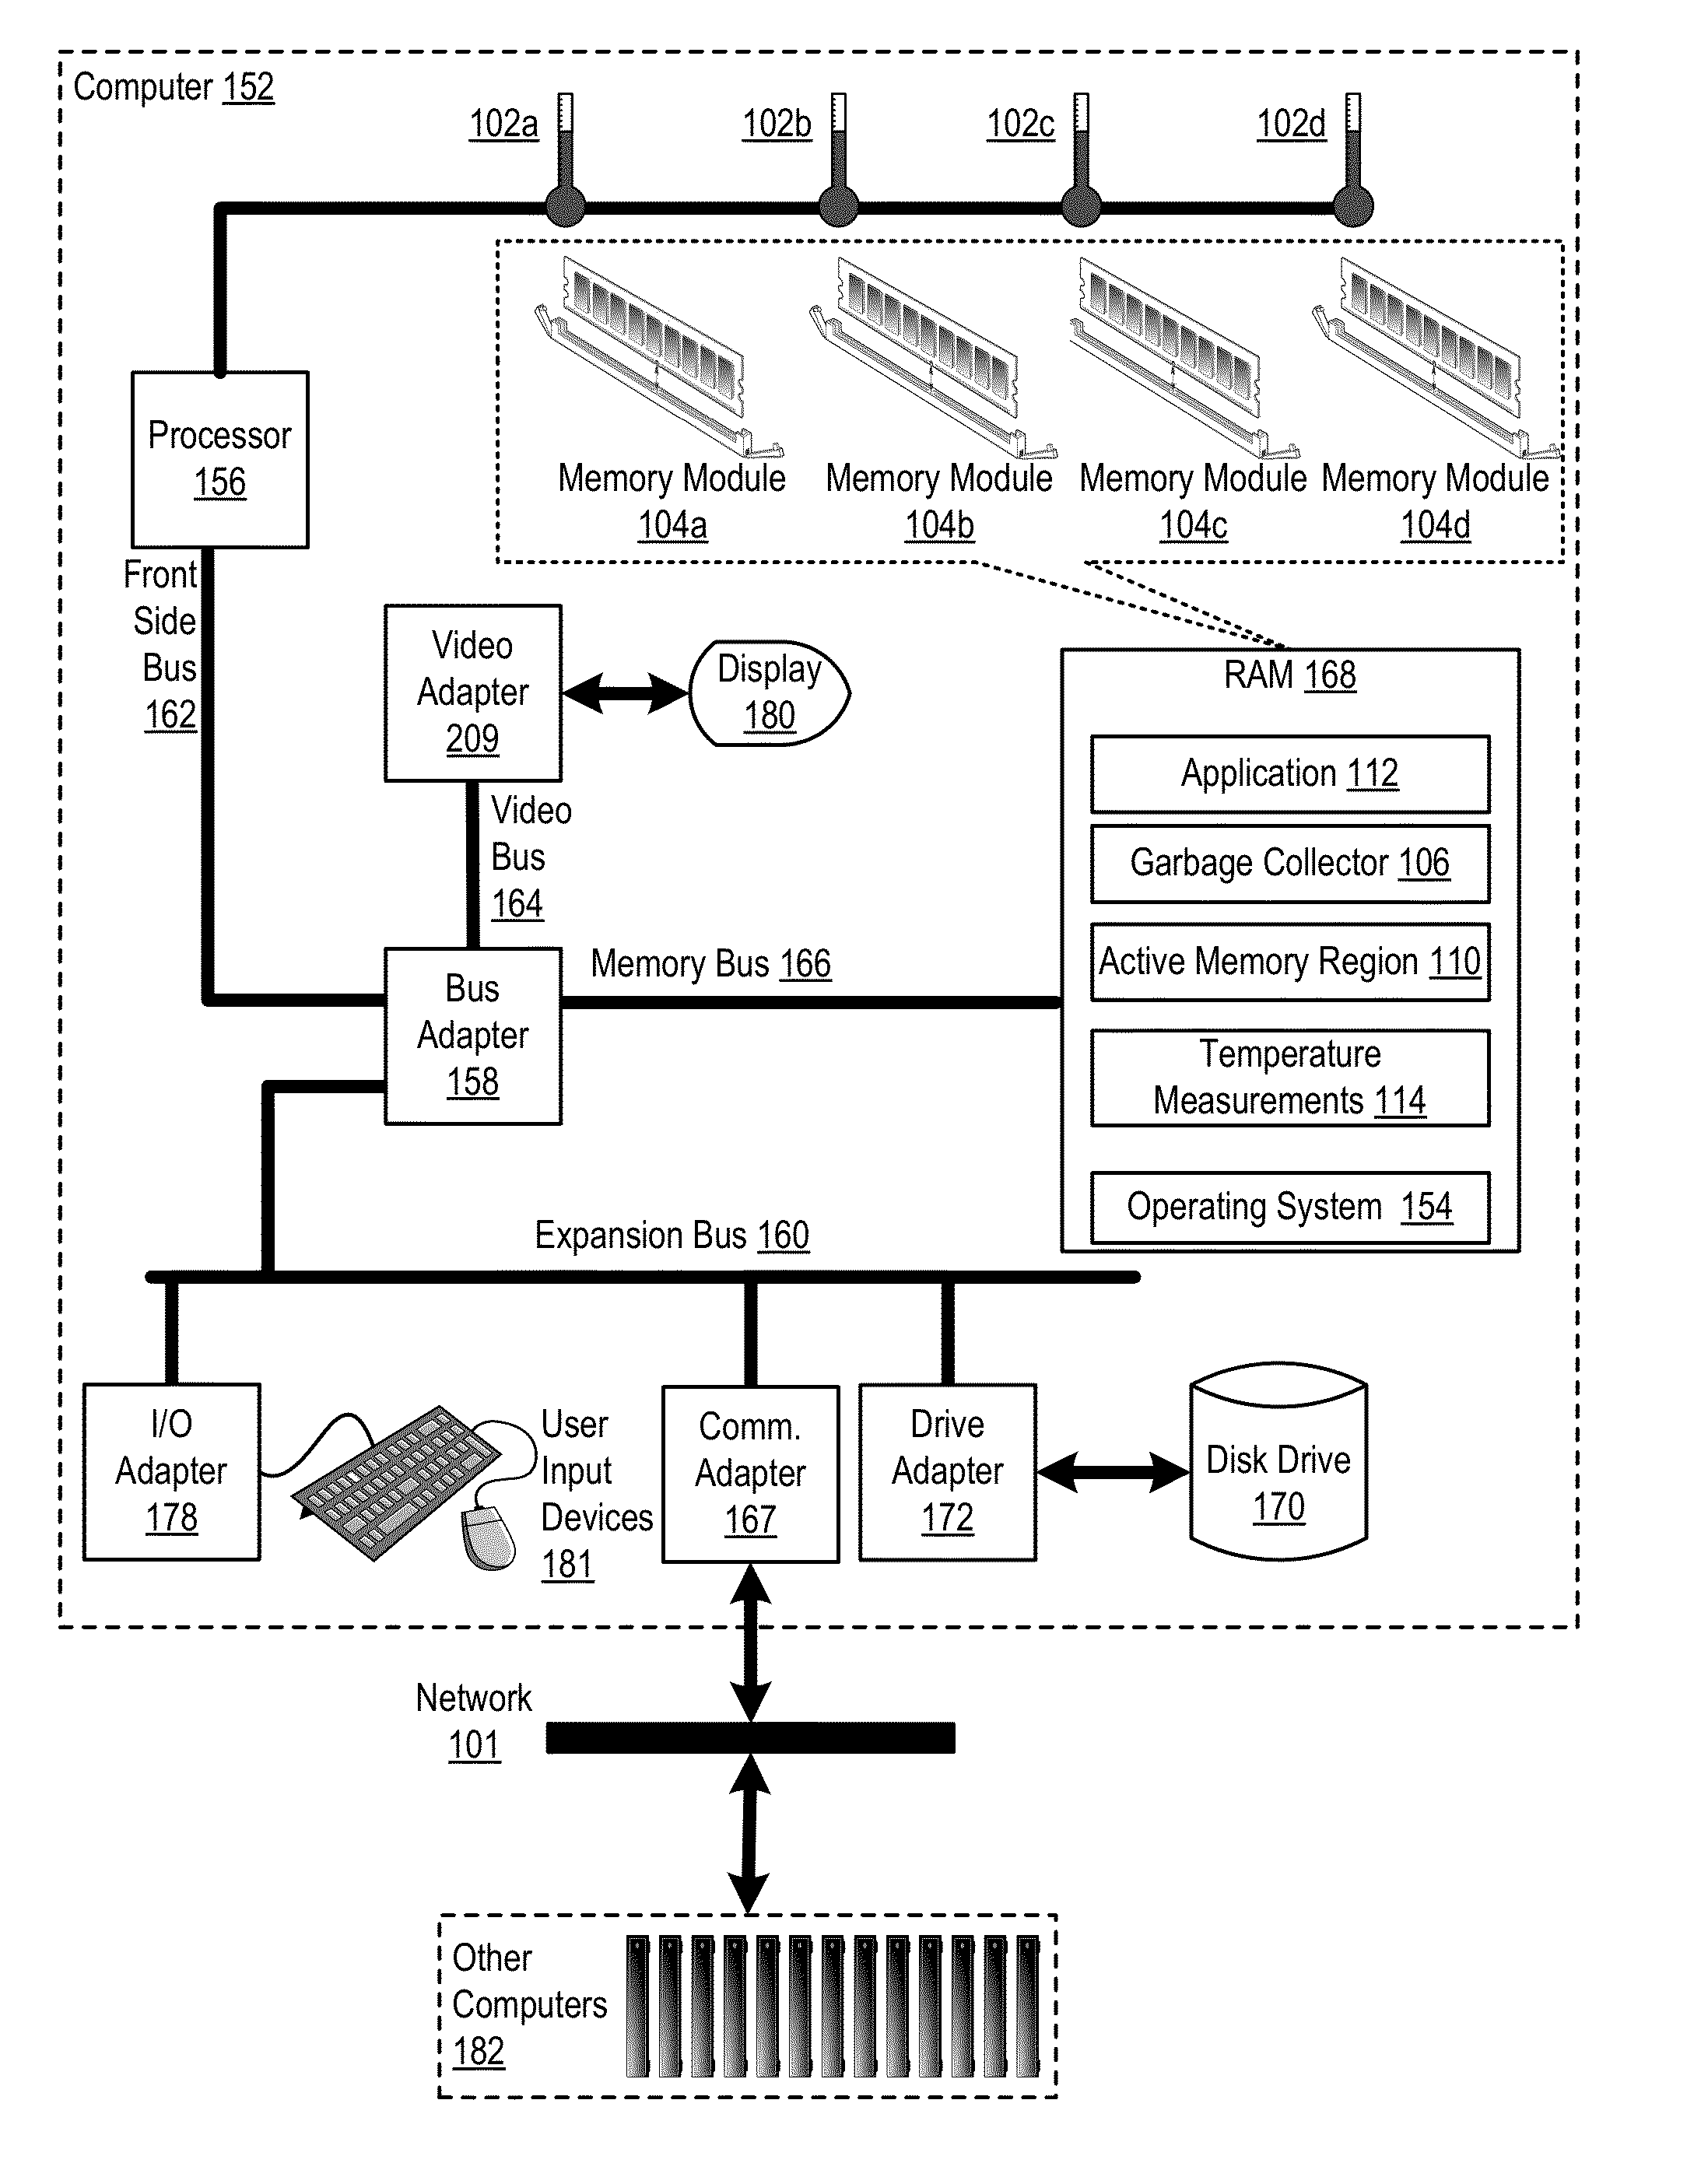 Administering Thermal Distribution Among Memory Modules Of A Computing System